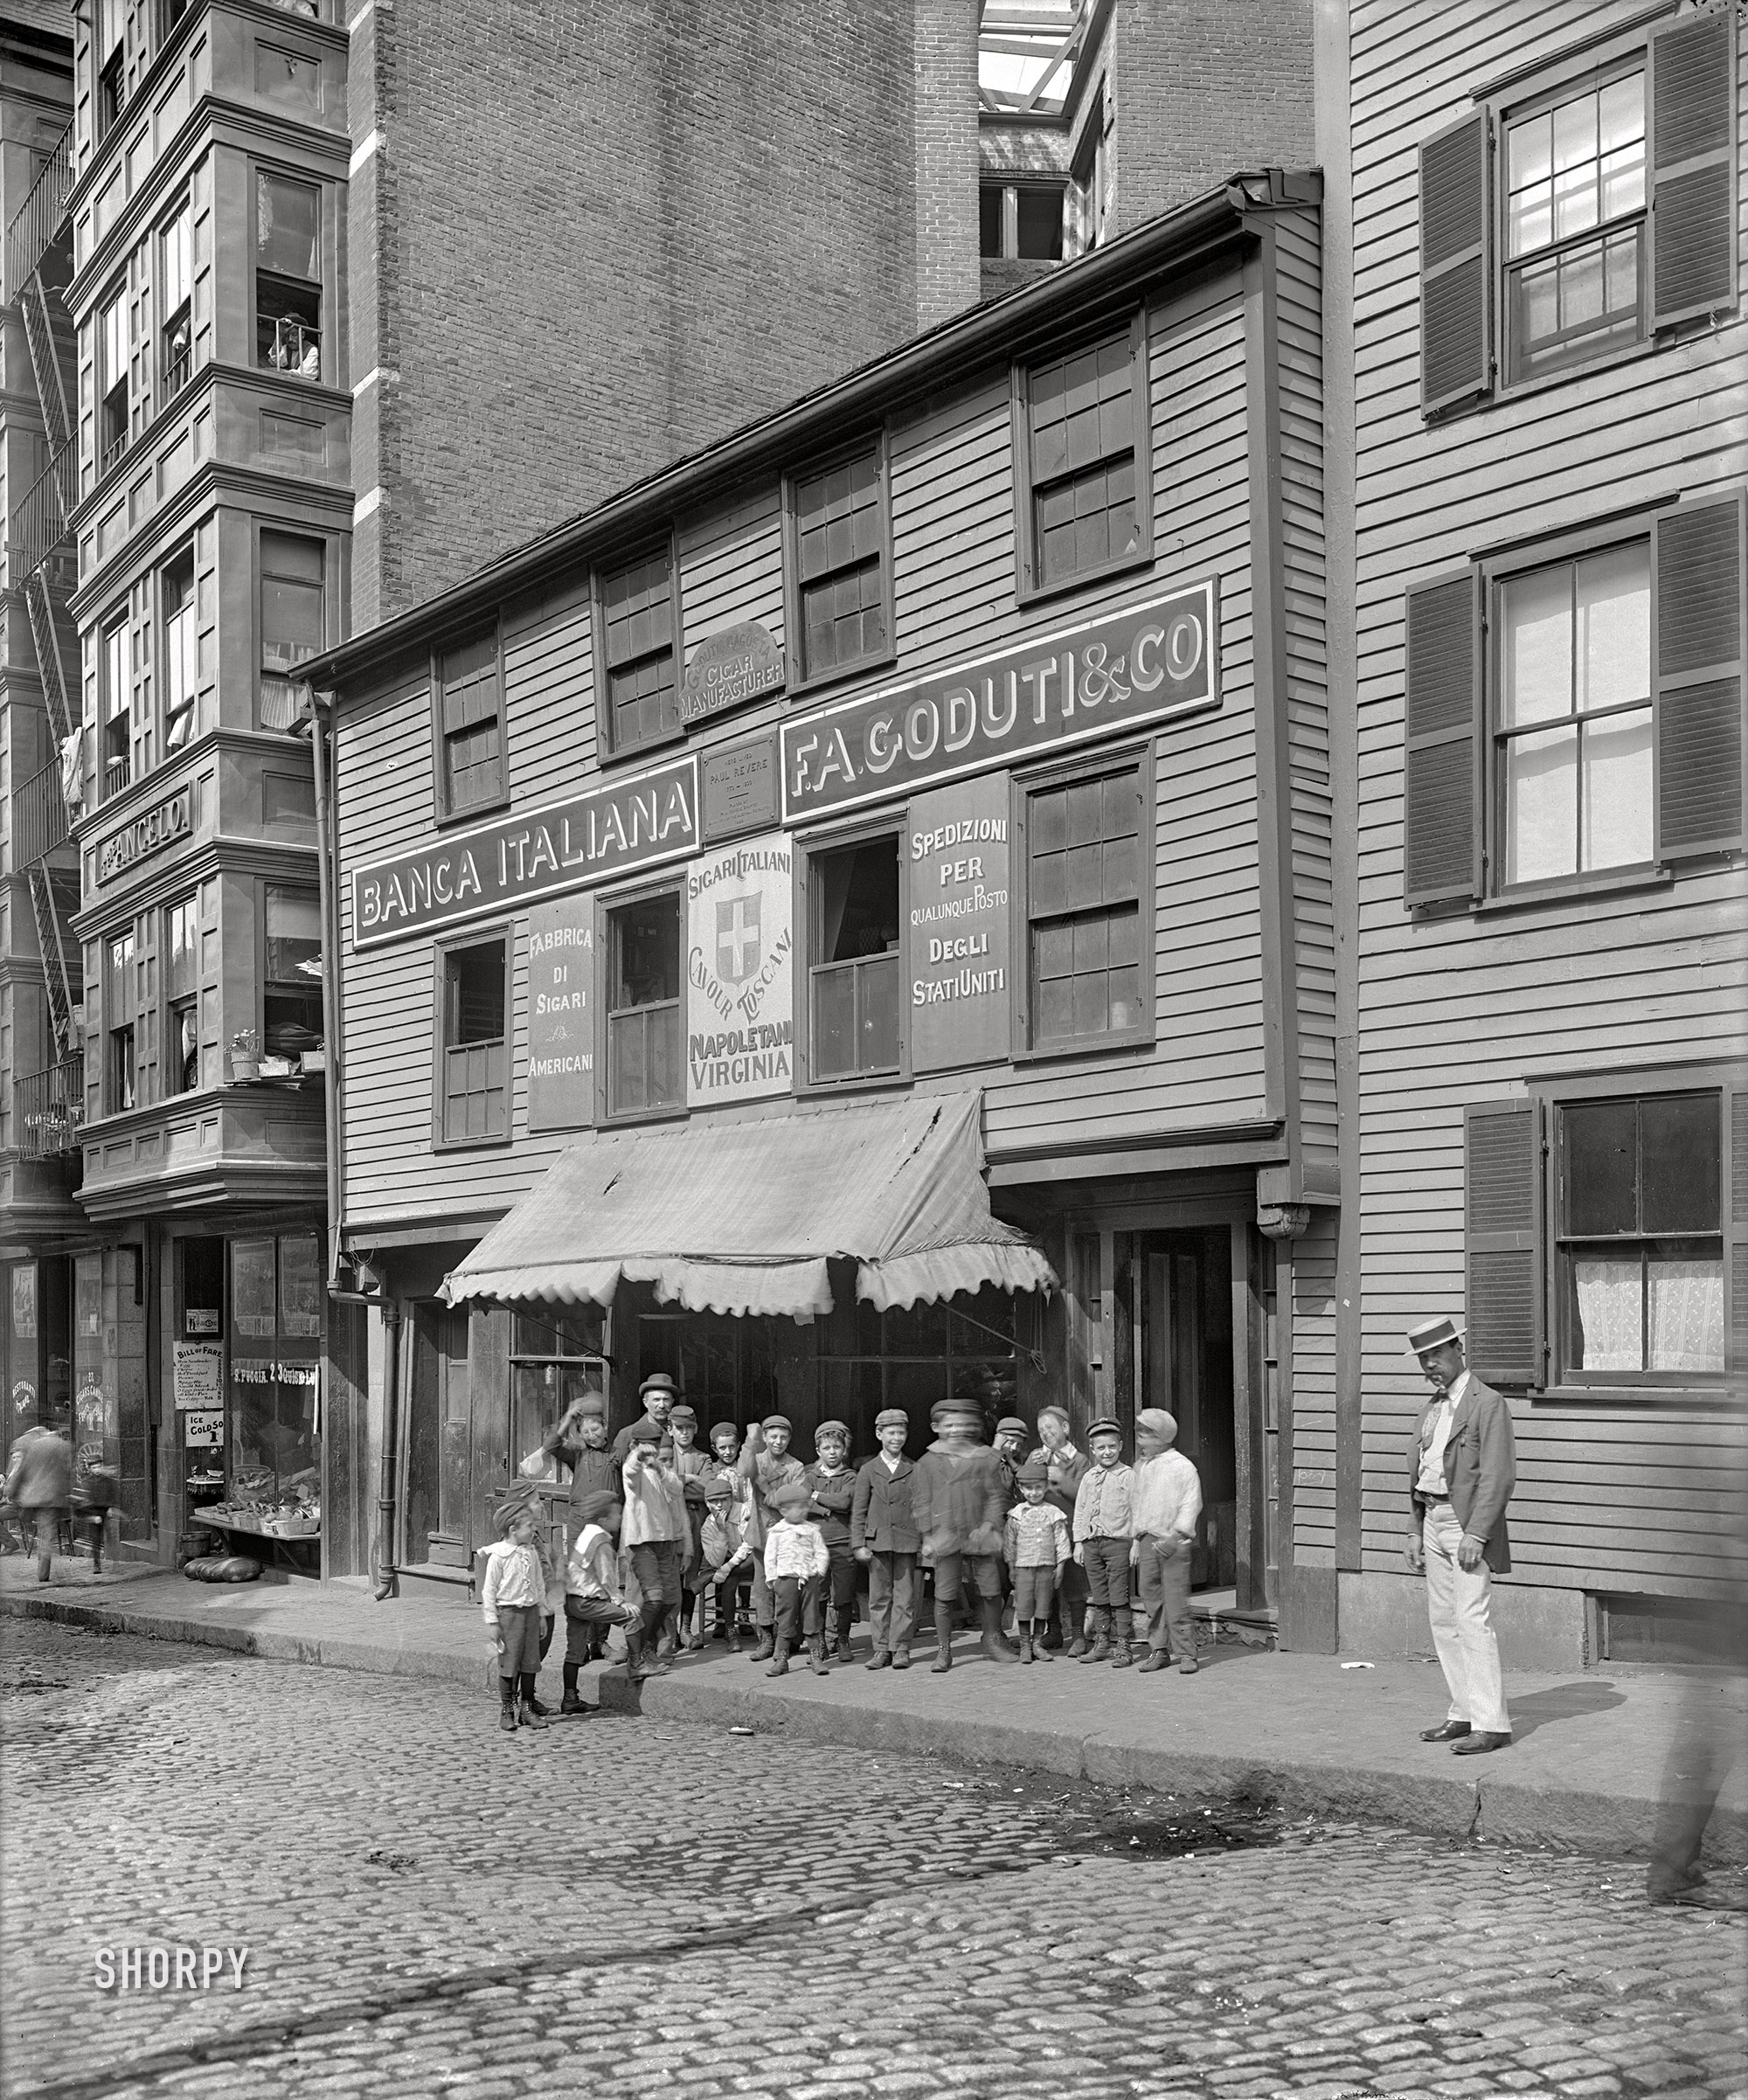 Boston, 1900. "Home of Paul Revere, North Square." The British were coming, and the Italians, too. 8x10 inch dry plate glass negative, Detroit Photographic Company. View full size.